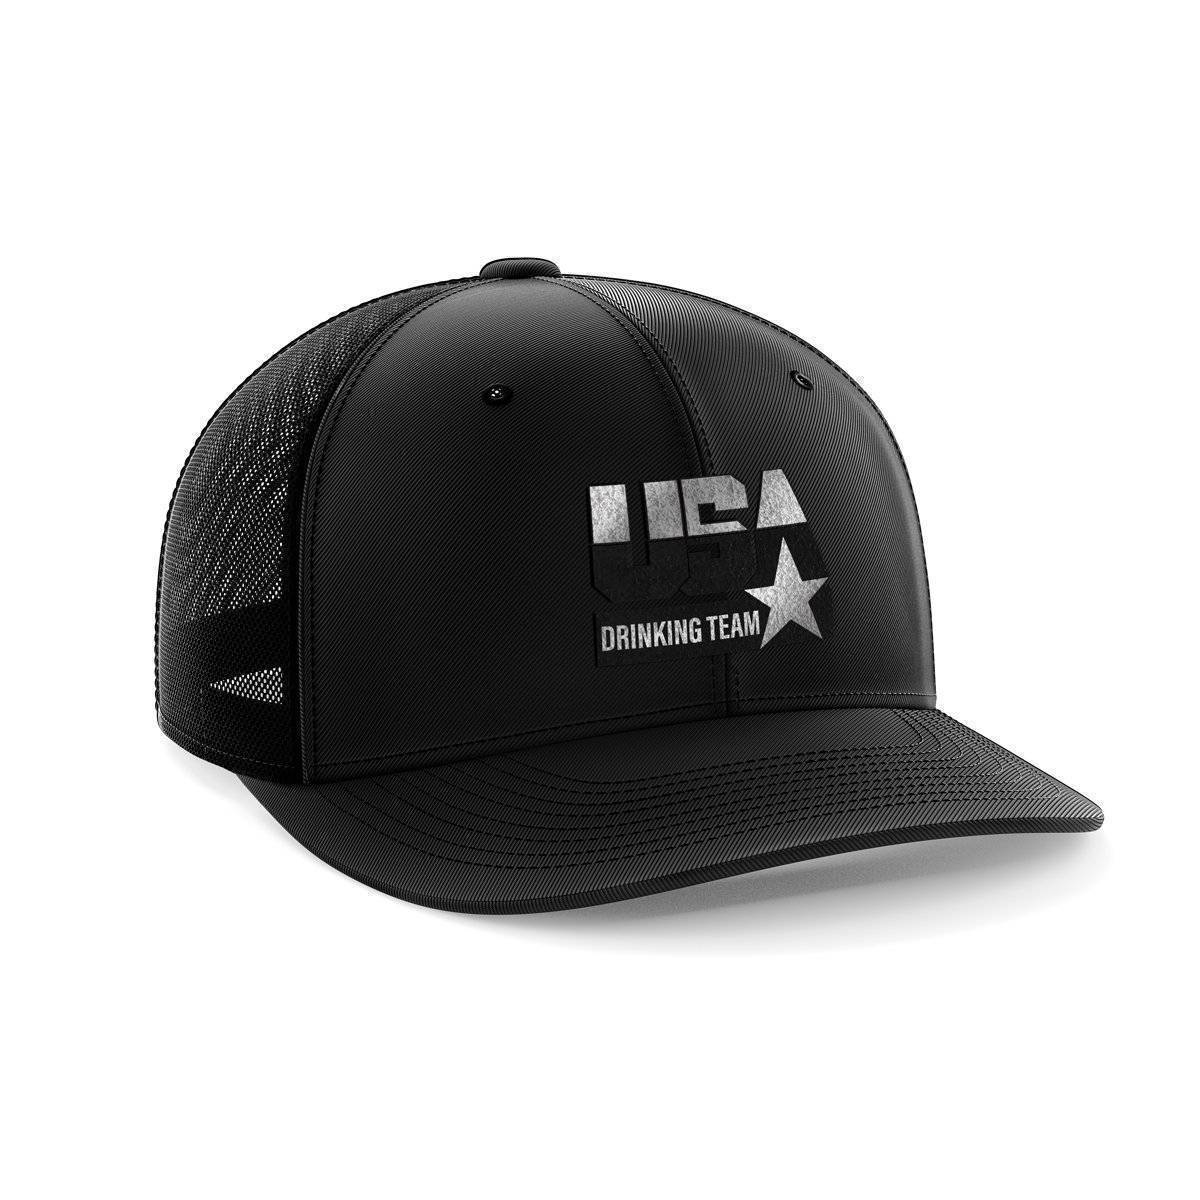 USA Drinking Team Black Patch Hat - Greater Half